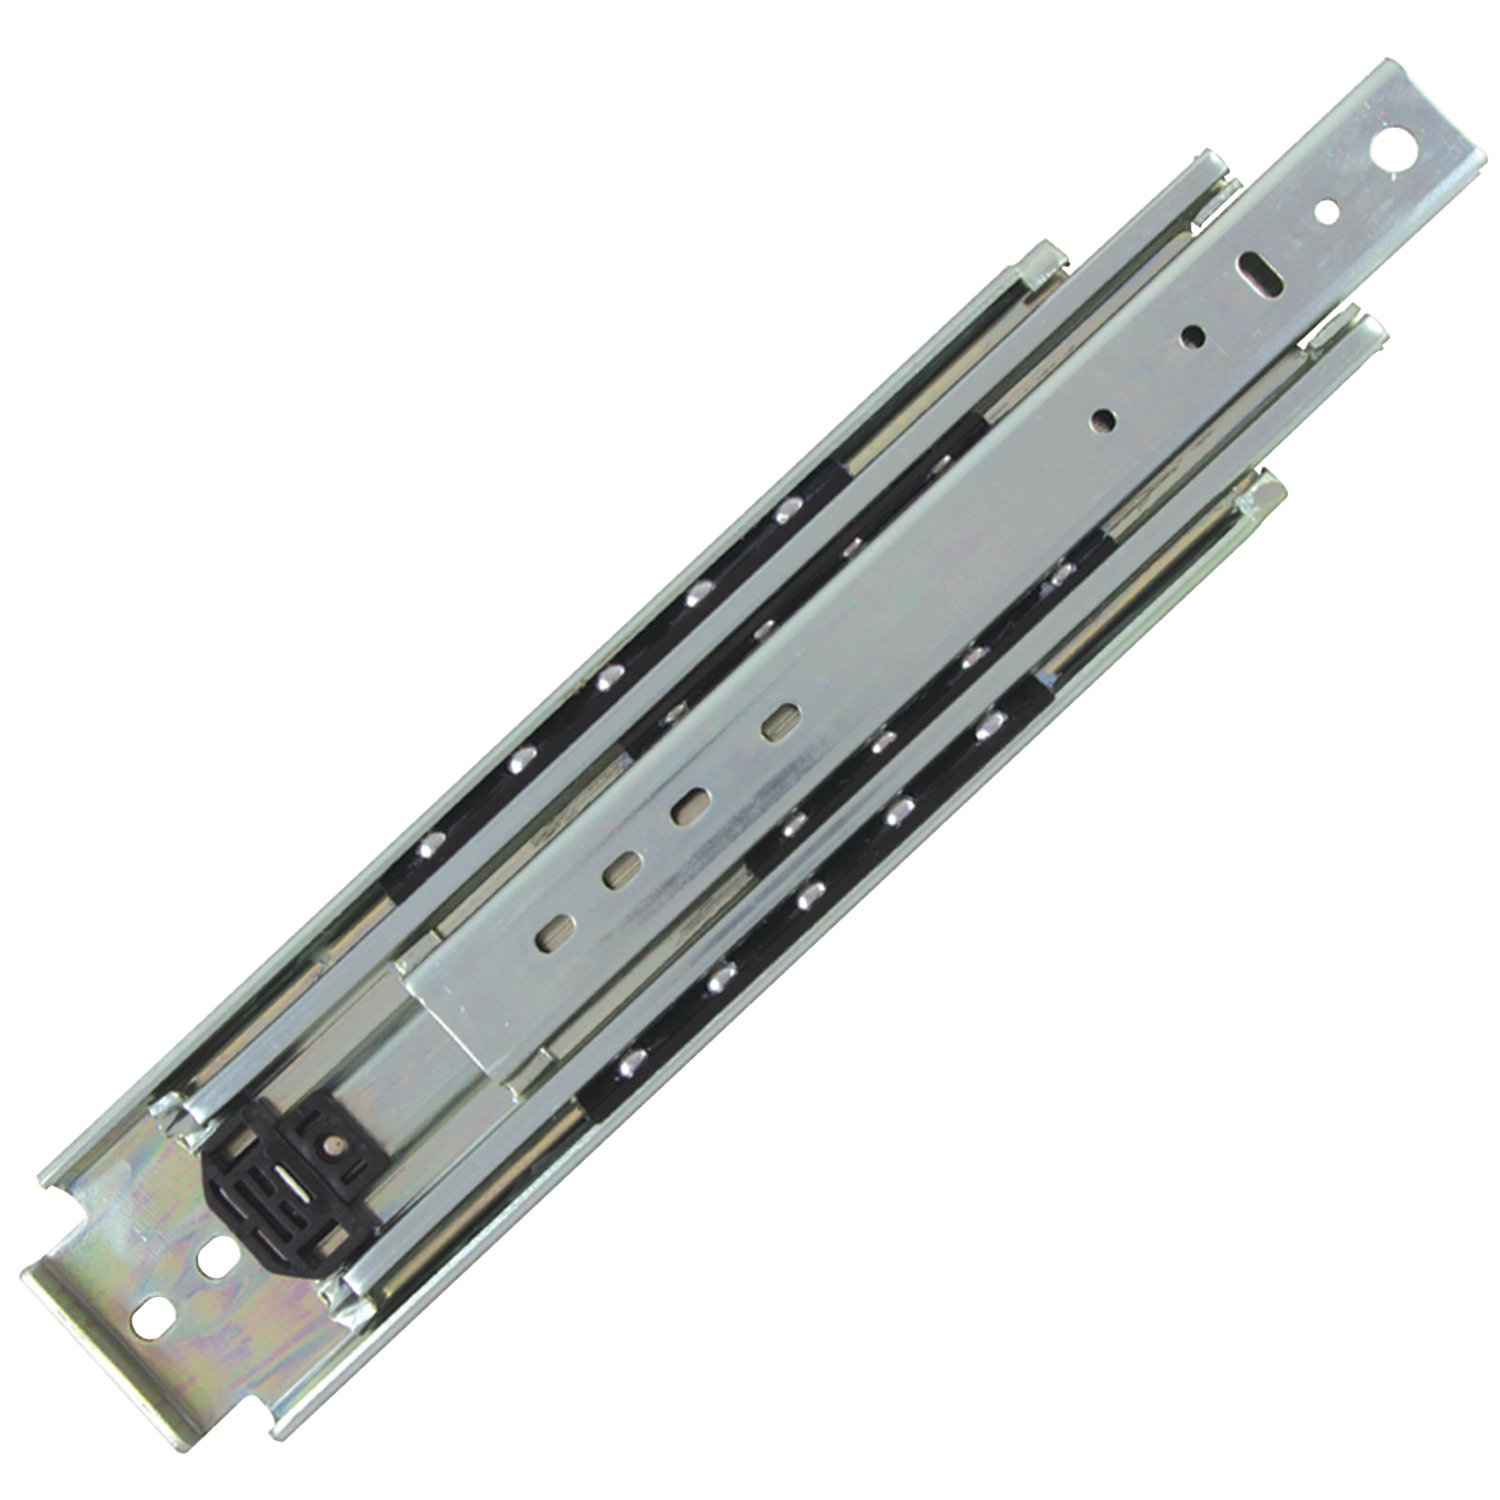 Drawer Slide - Full Extension A 3 beam slide to support up to 200kg load, with positive stop. Cold rolled steel drawer slide, tested to 40,000 usage cycles.